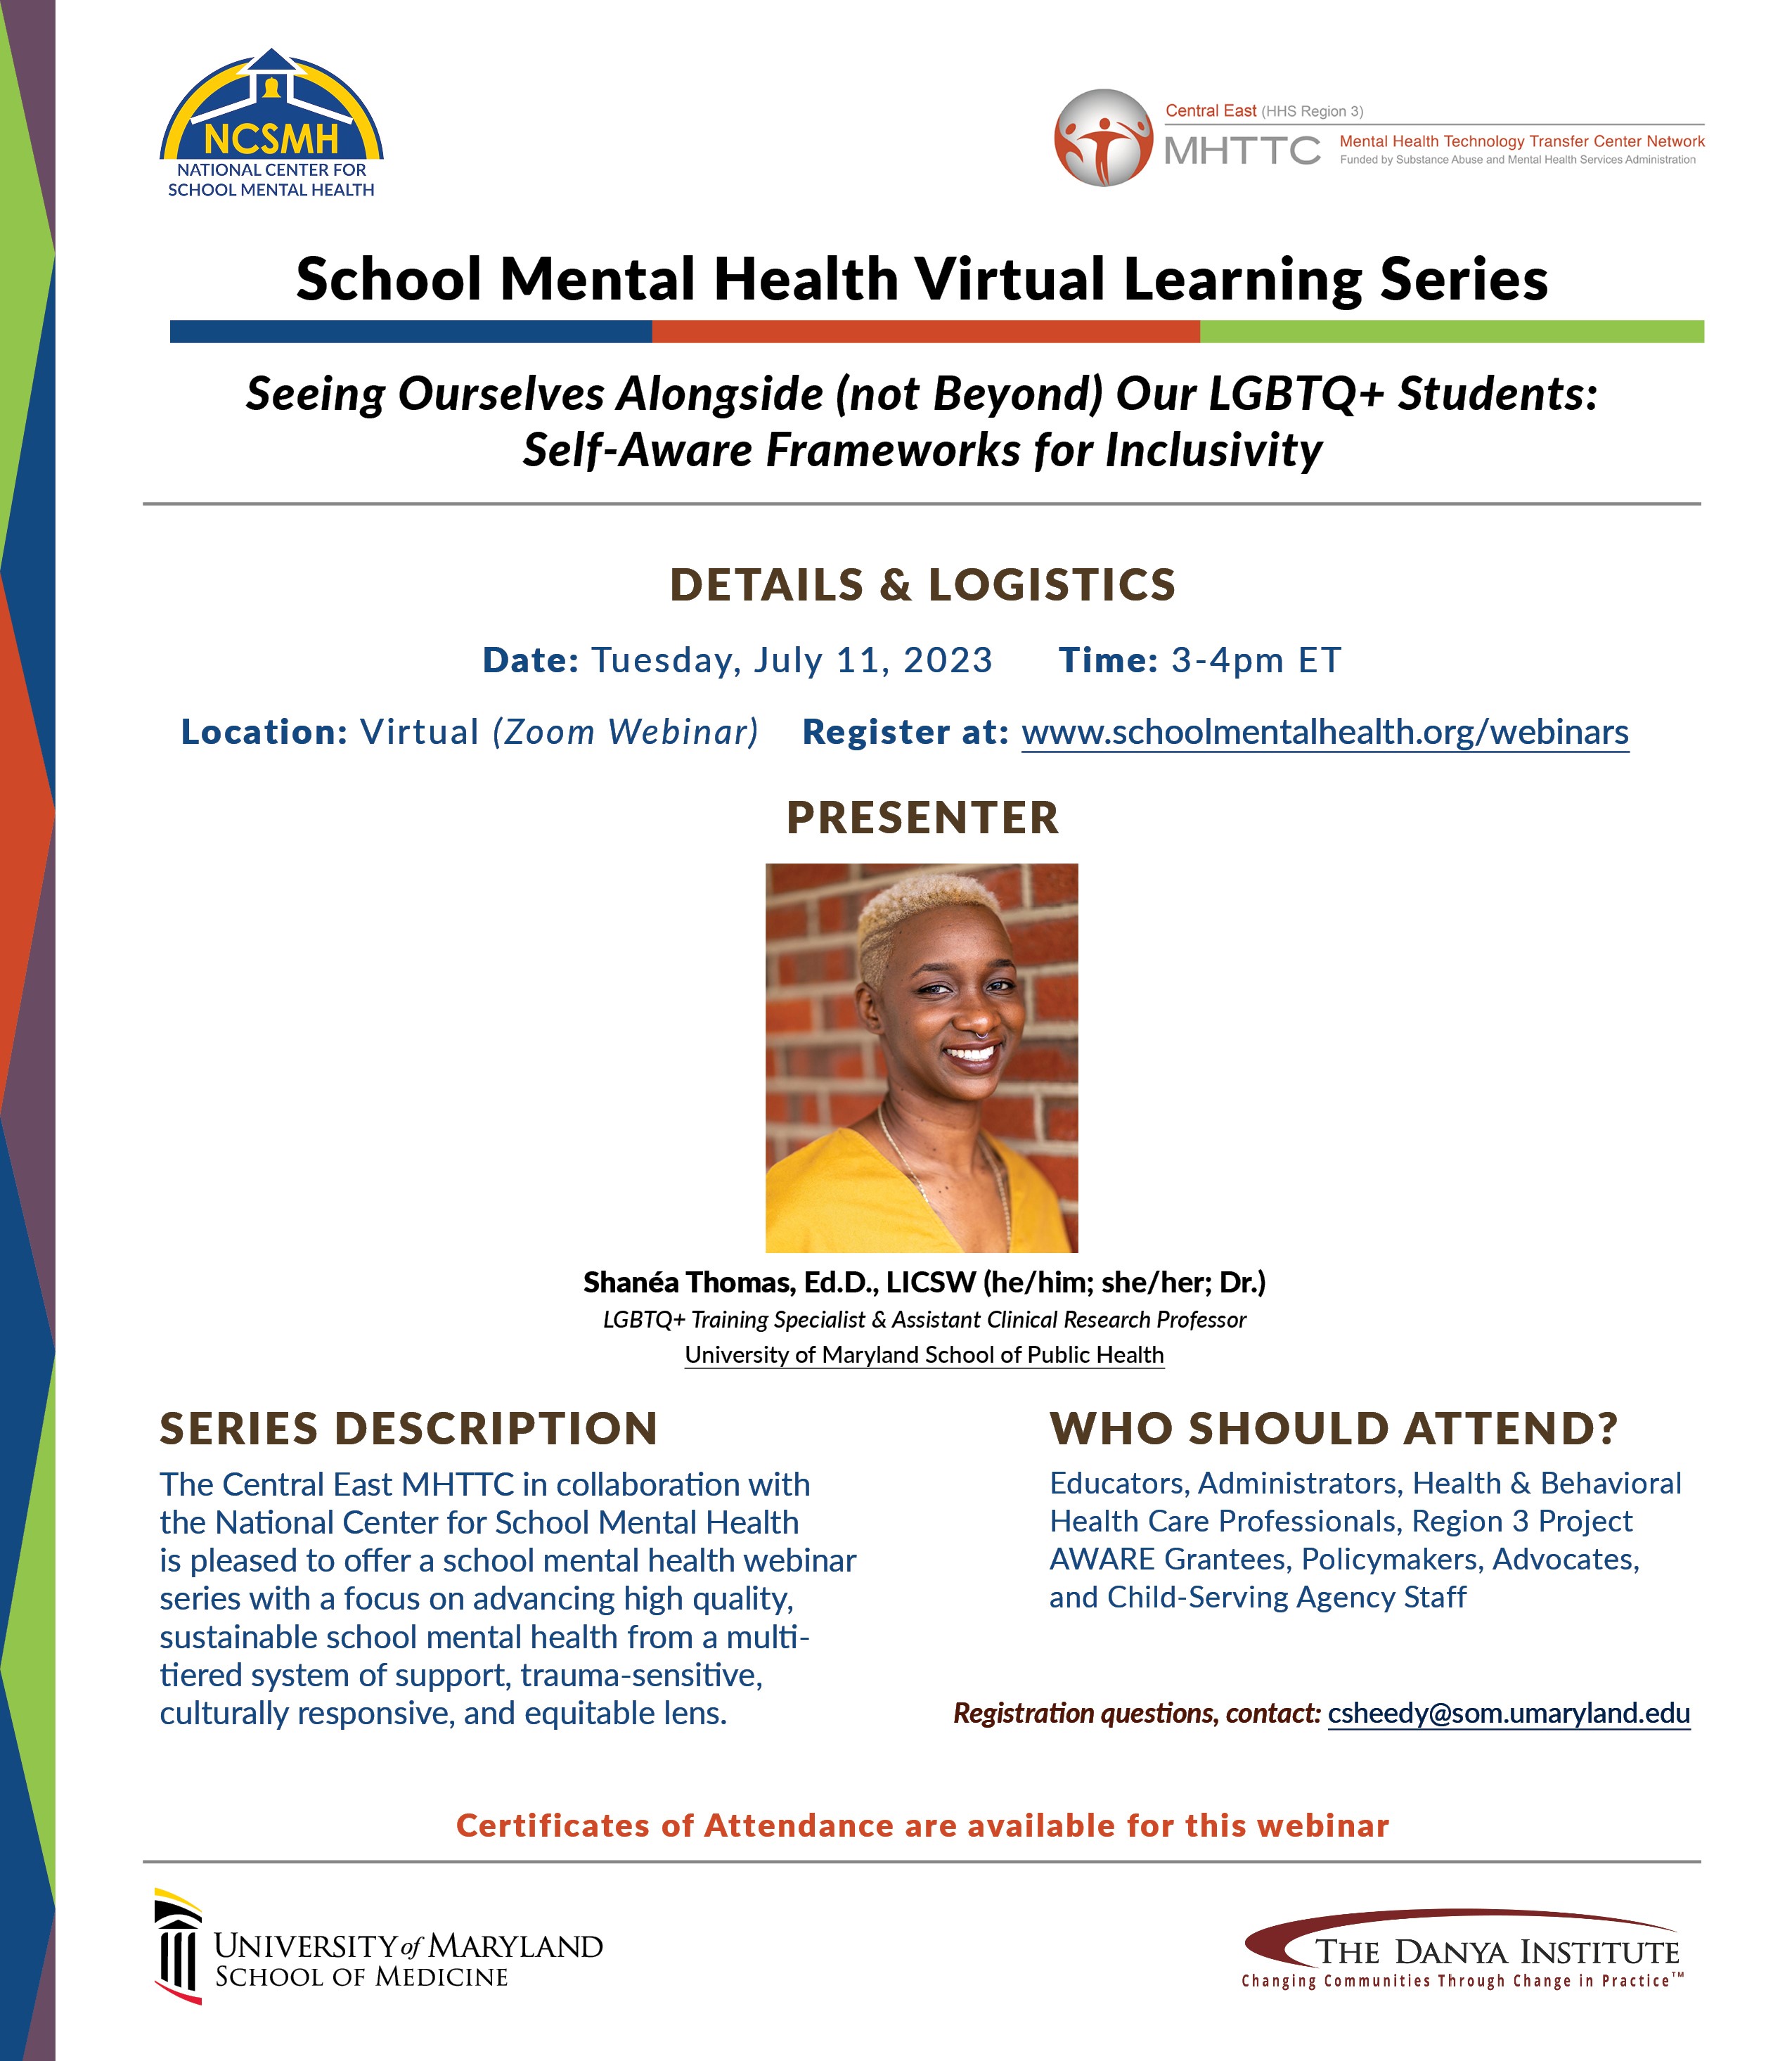 School Mental Health Virtual Learning Series: Seeing Ourselves Alongside (not Beyond) Our LGBTQ+ Students: Self-Aware Frameworks for Inclusivity. Tuesday, July 11, 2023, 3-4pm. Presenter: Shanea Thomas, EdD, LICSW (he/him, she/her, Dr.). LGBTQ+ Training Specialist & Assistant Clinical Research Professor, University of Maryland School of Public Health.